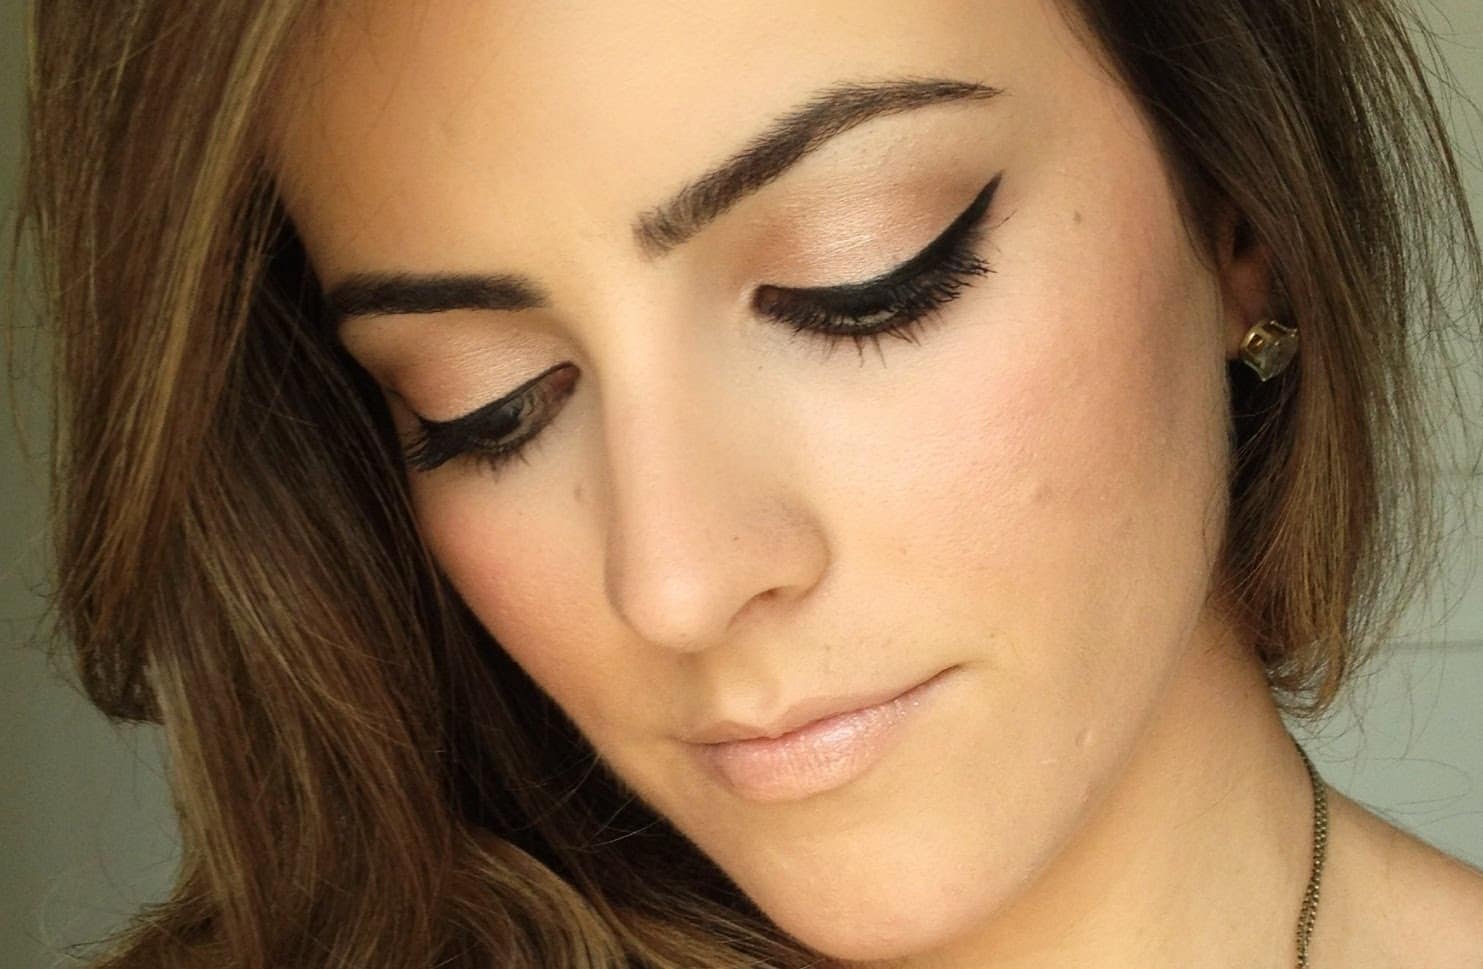 Simple makeup: 70 ideas for all occasions + step by step